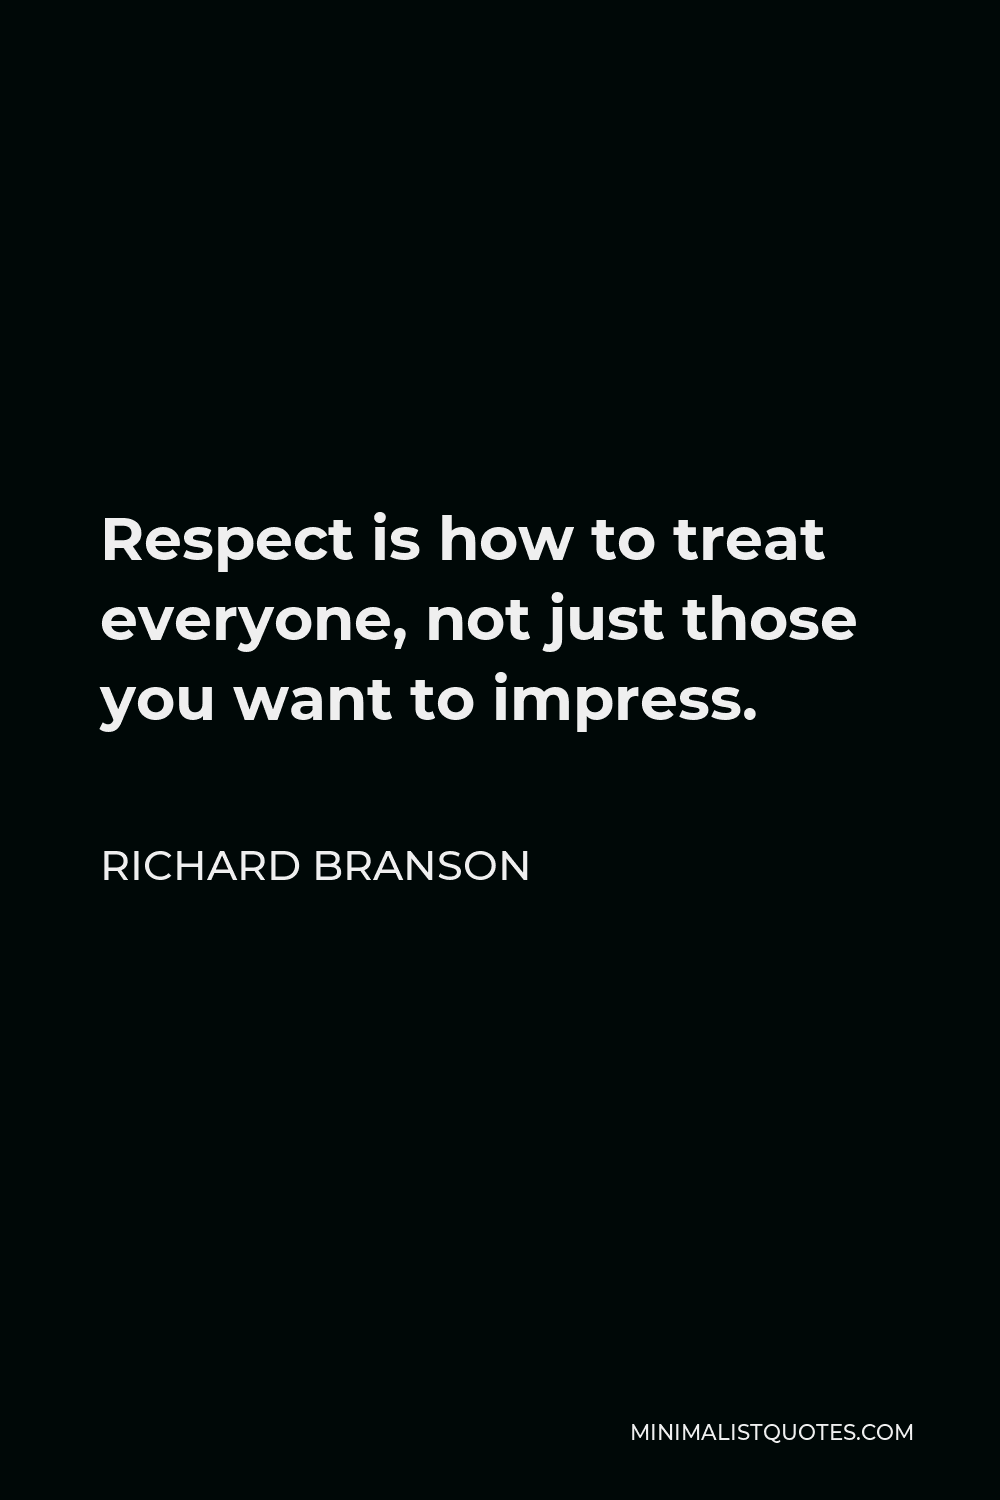 Richard Branson Quote - Respect is how to treat everyone, not just those you want to impress.